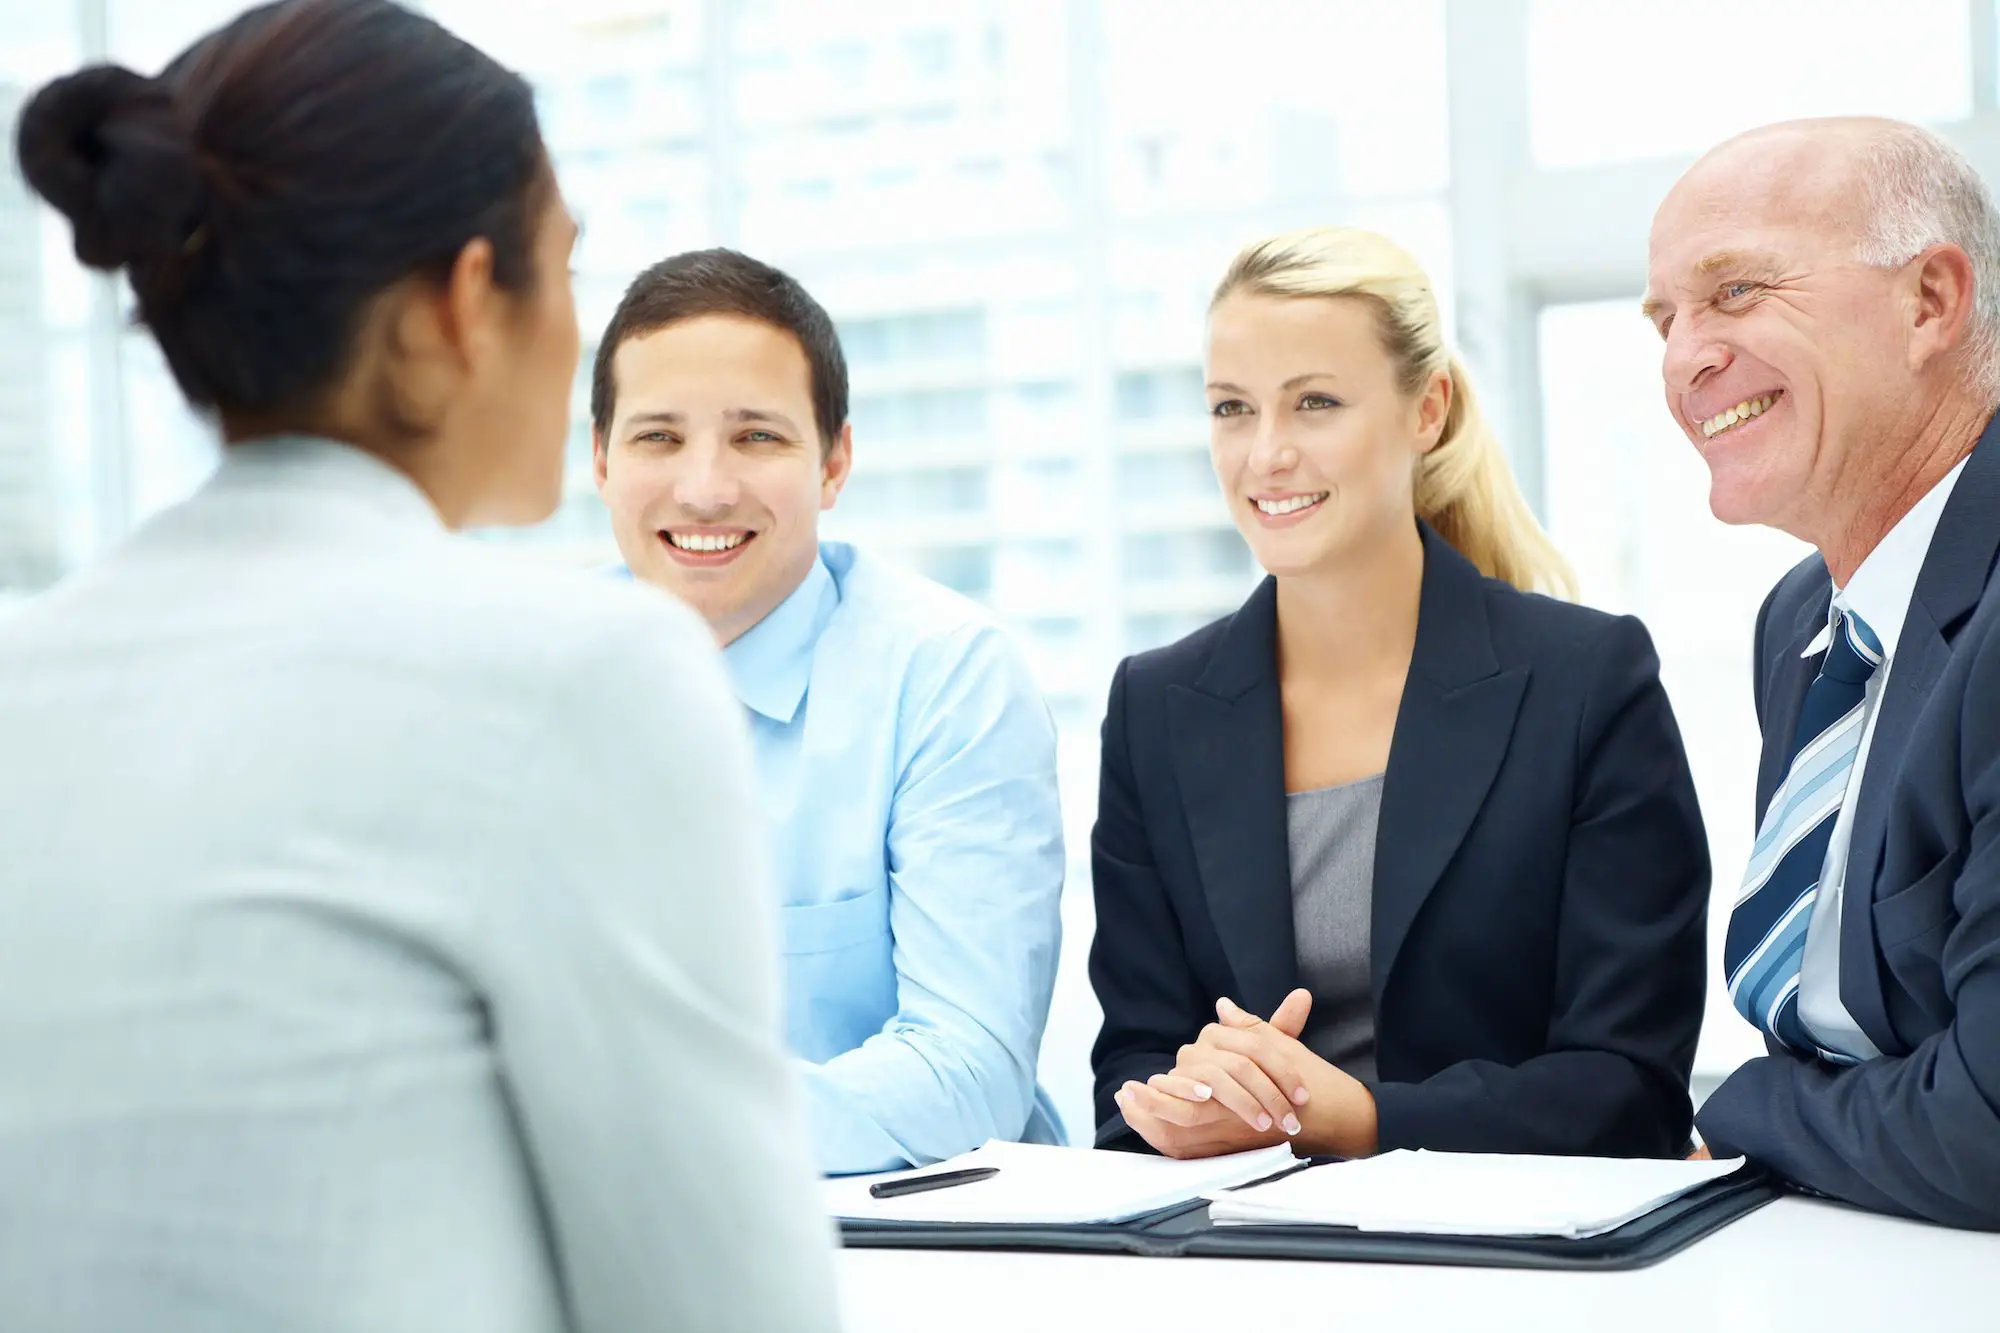 A Guide to Successful Interviewing